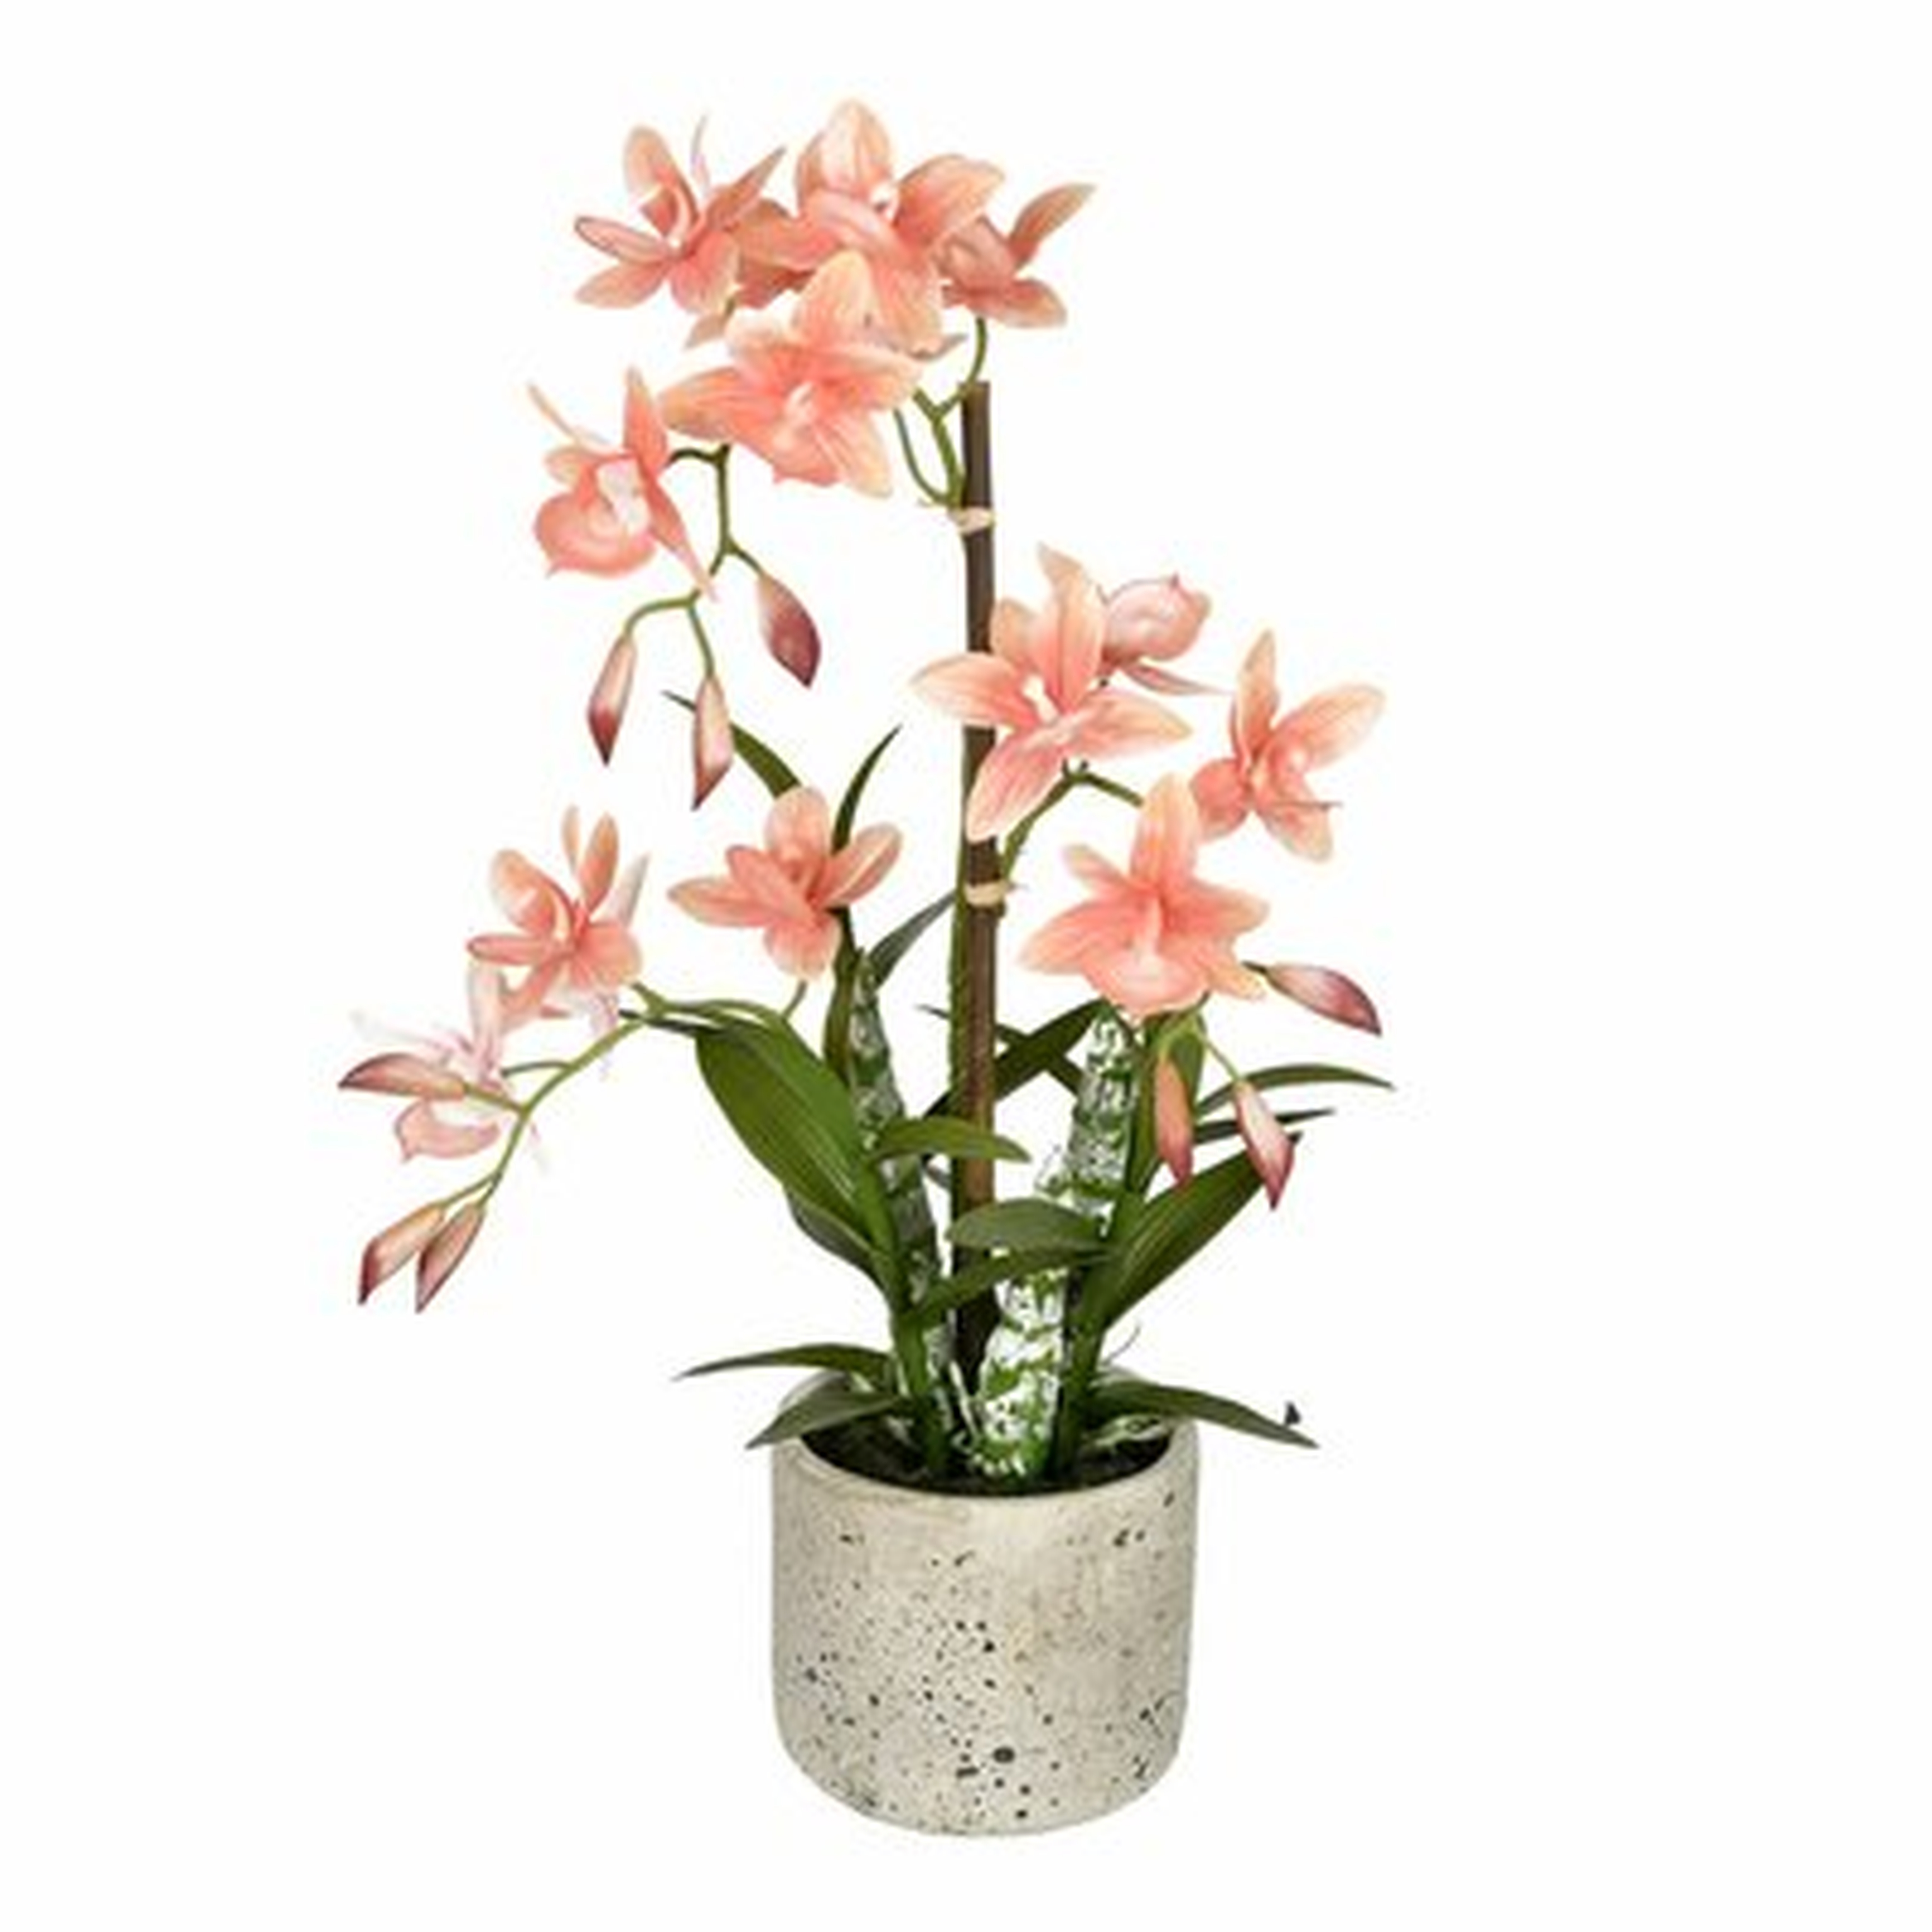 Artificial Cycnoches Plant in Pot - Wayfair